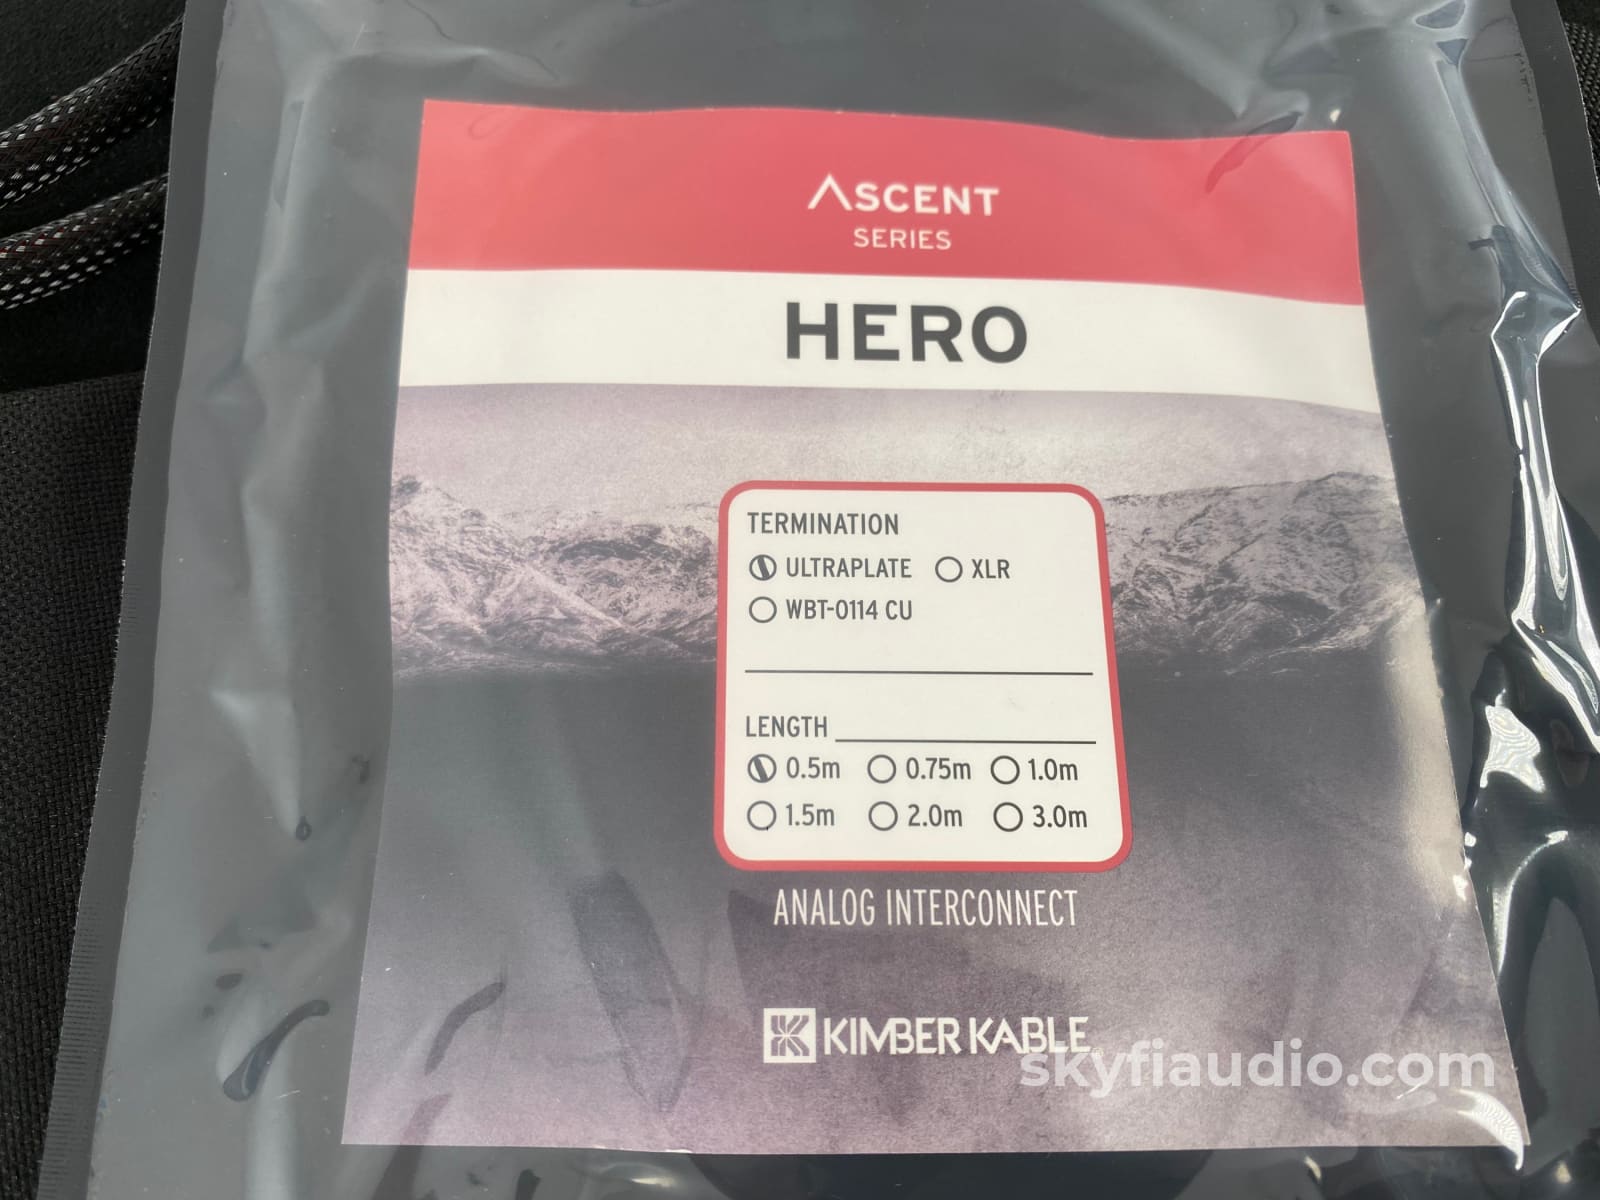 Kimber Kable - Hero Rca Cables With Wbt Connectors 0.5M New